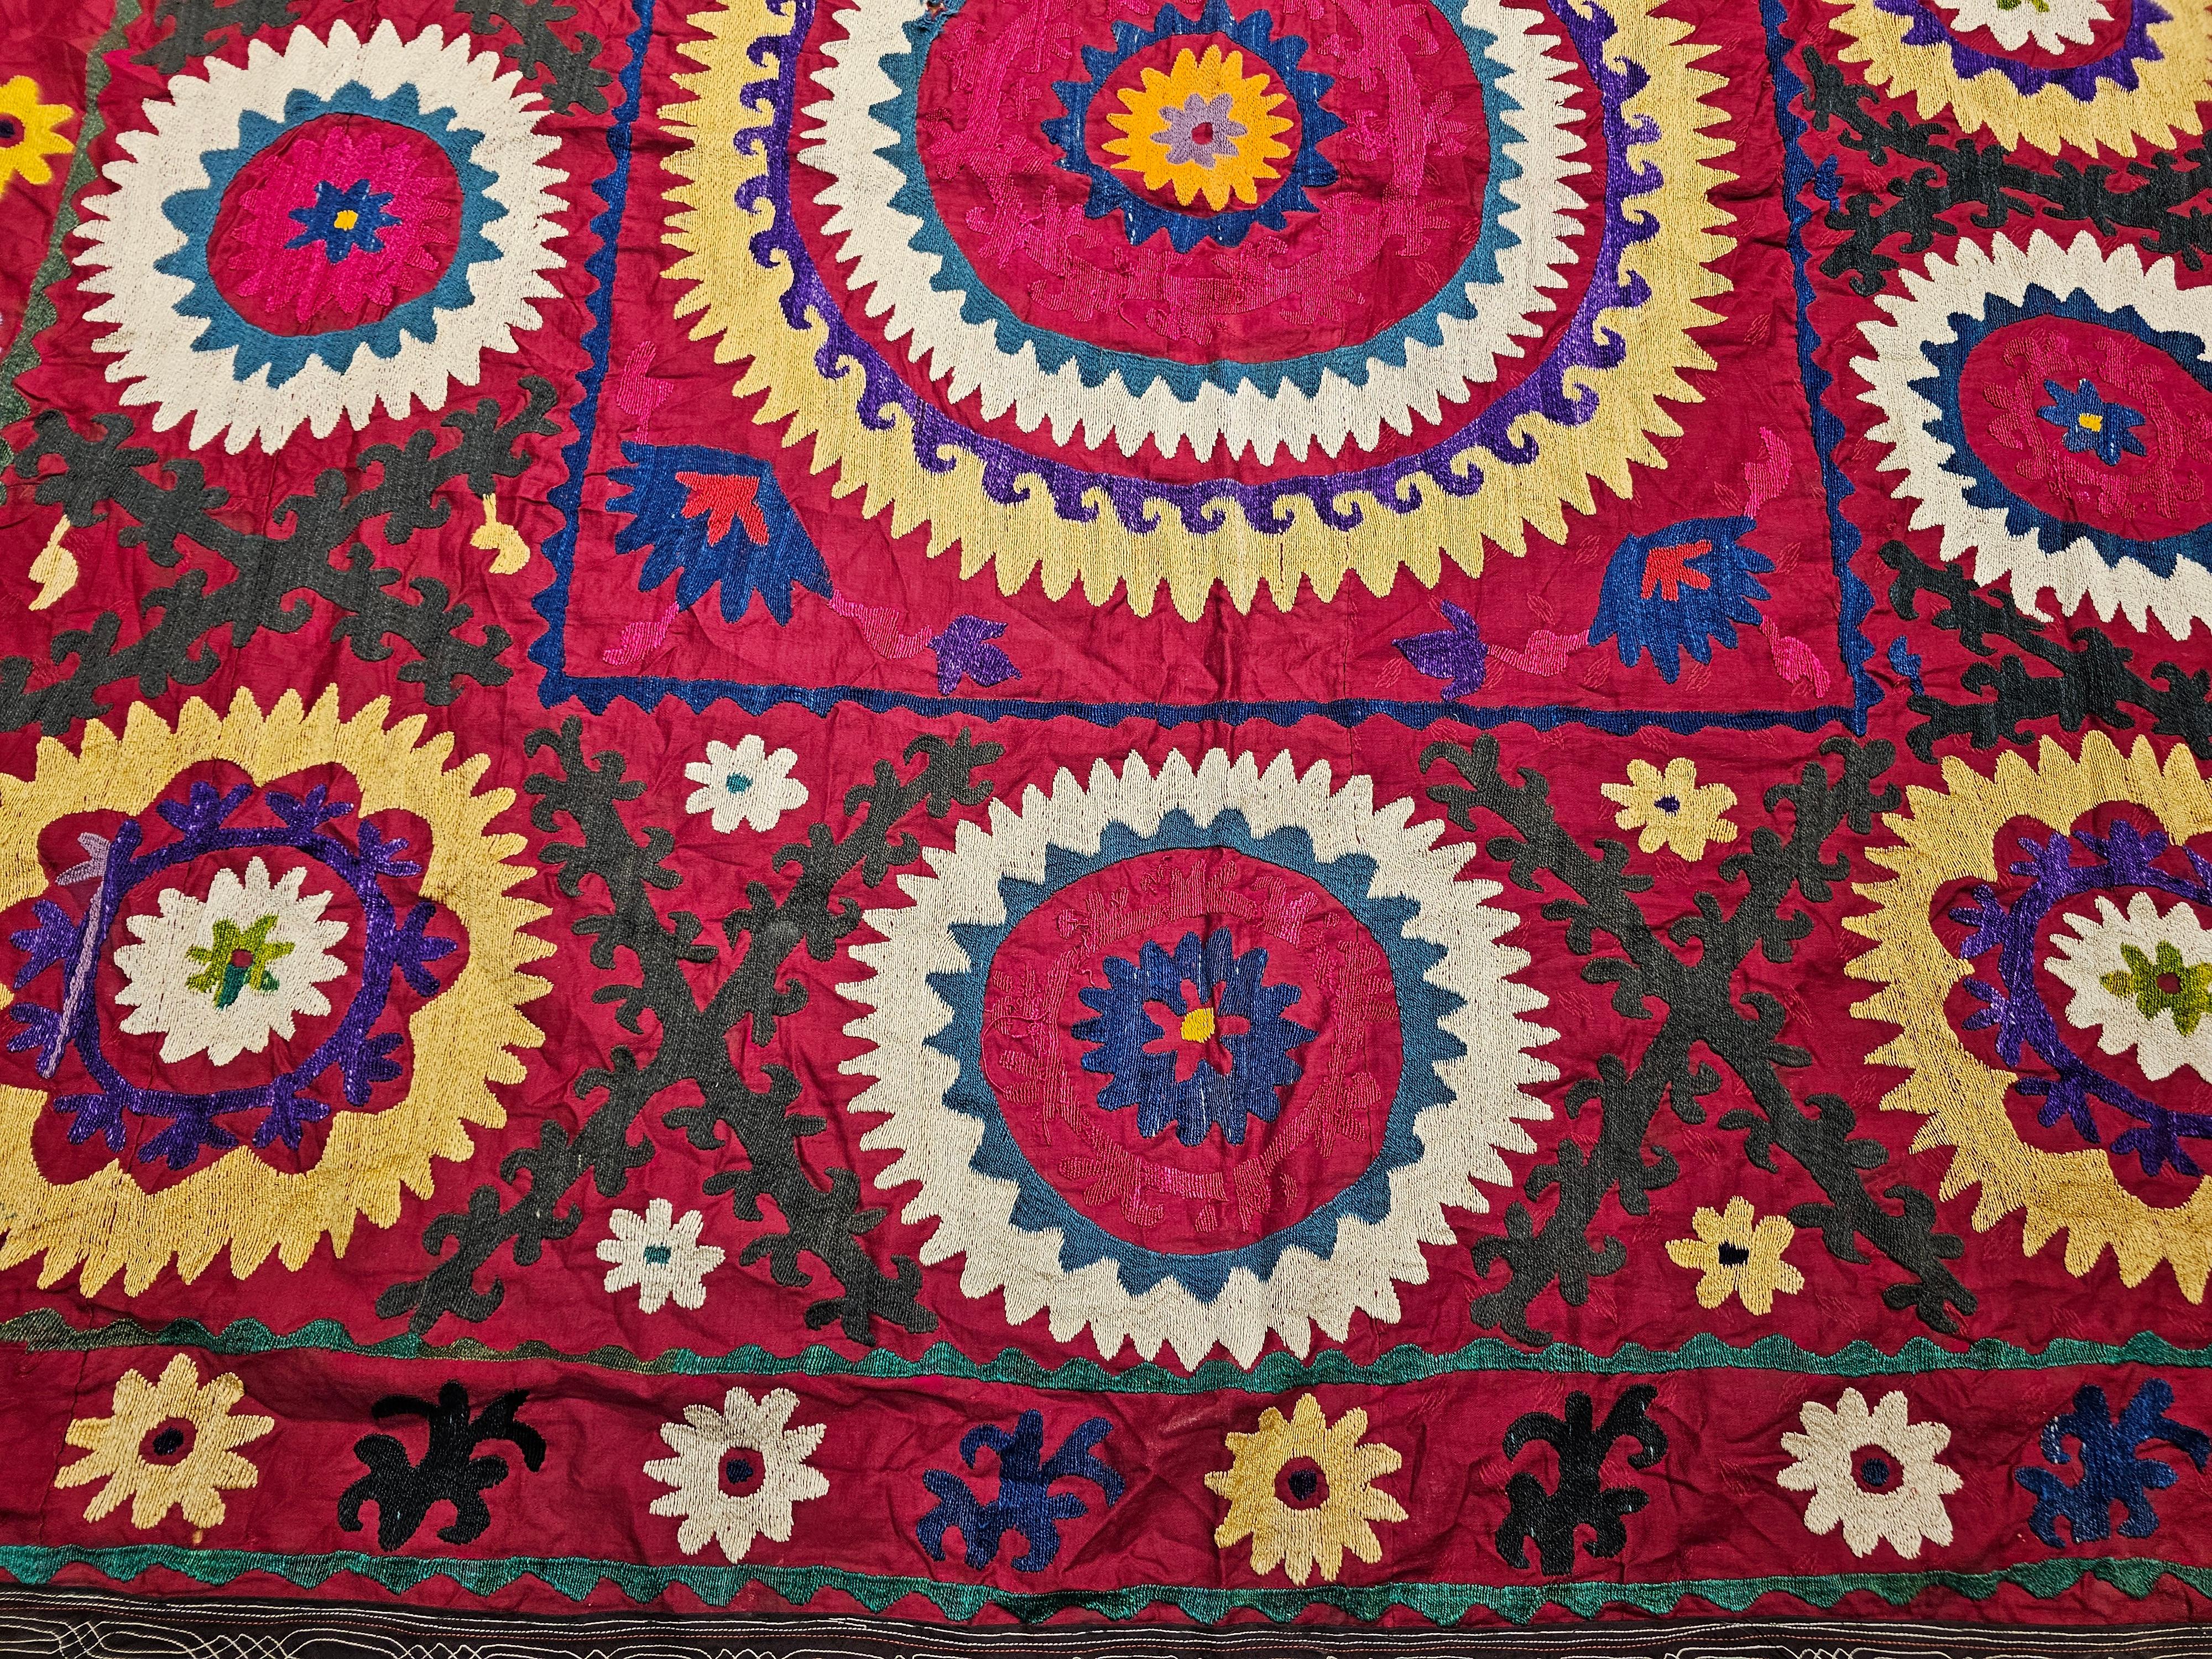 Cotton Vintage Uzbek Suzani Silk Embroidery in Crimson Red, Ivory, Blue, Yellow, Black For Sale